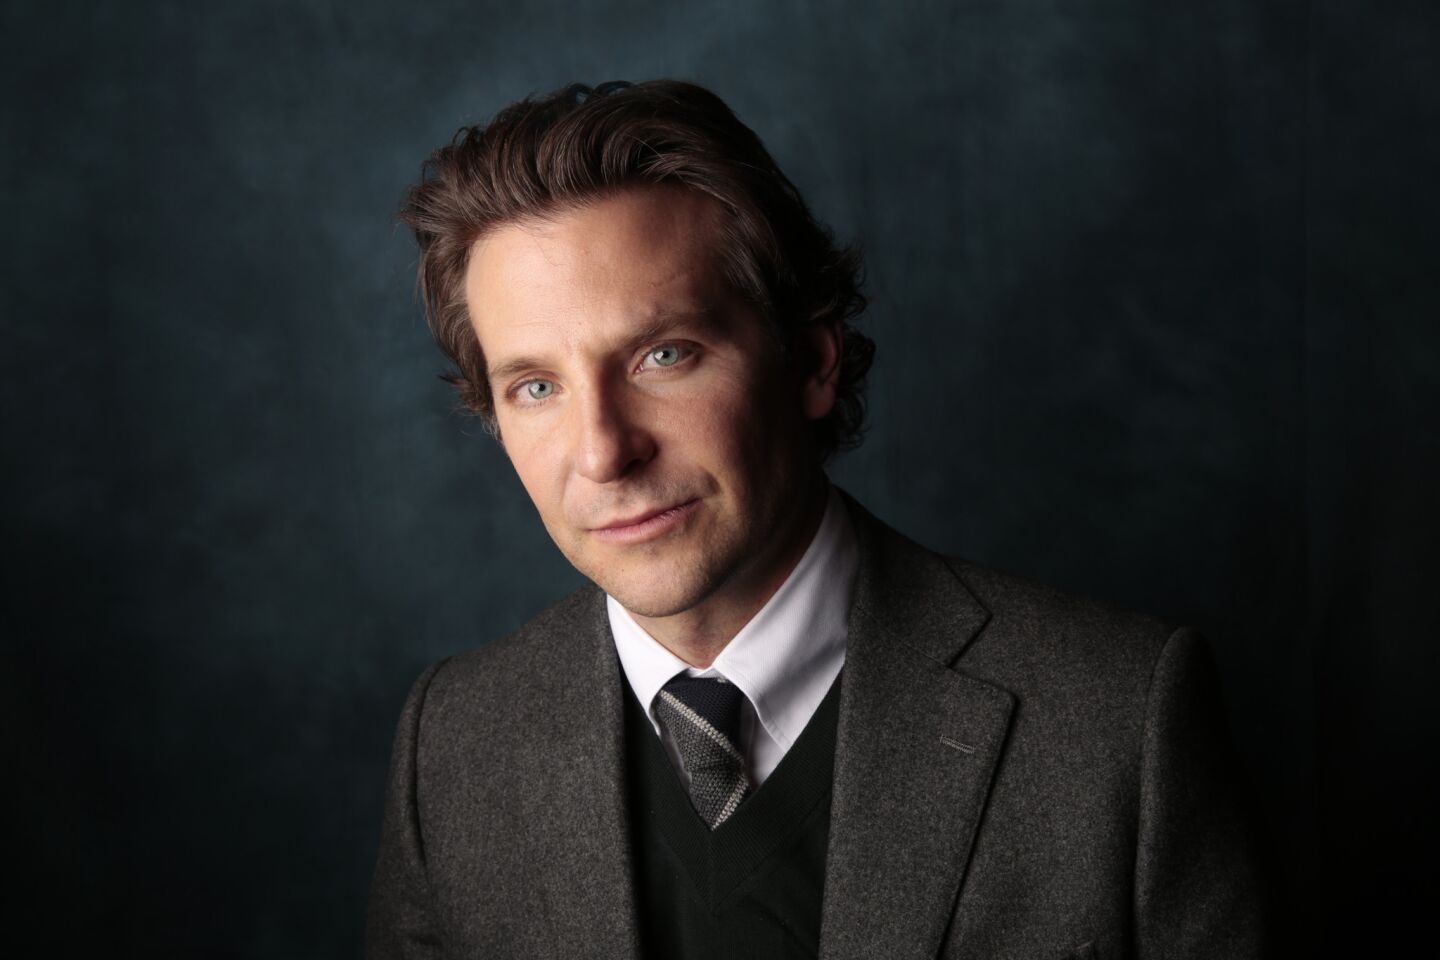 This is Bradley Cooper’s fourth acting nomination, and third in this category. His performance also earned nominations for a Golden Globe, BAFTA and SAG award.